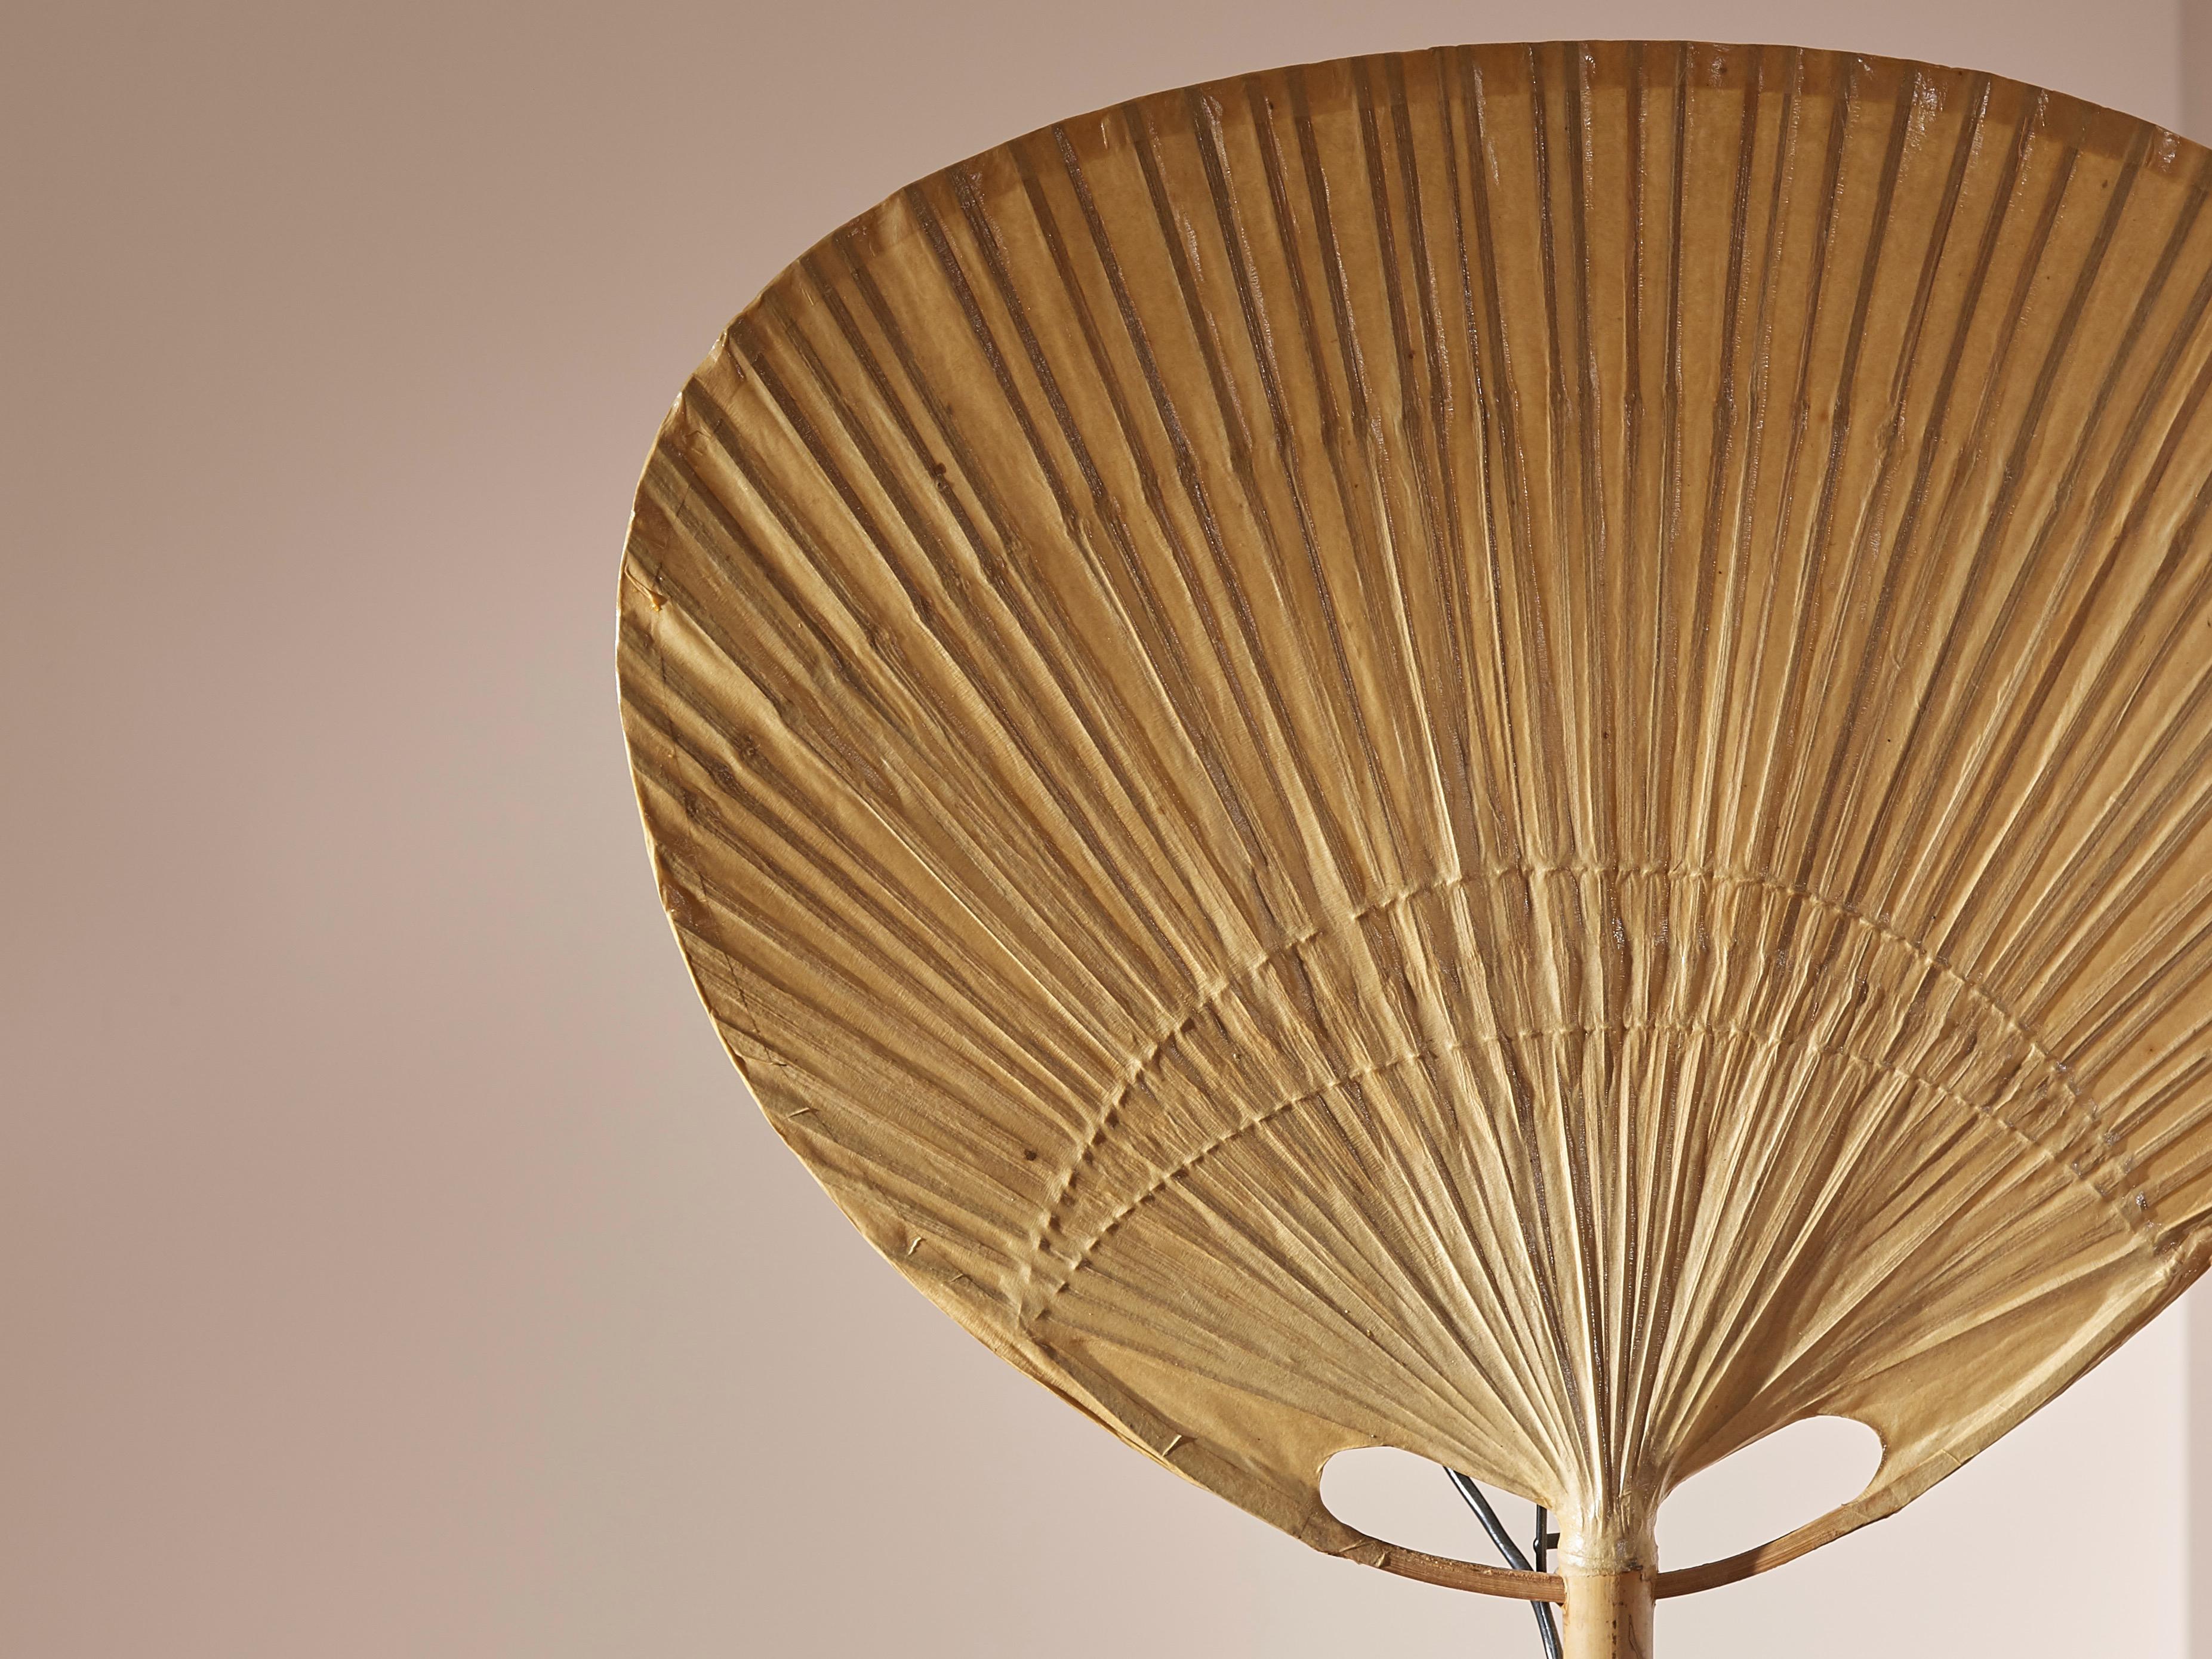 A rare Uchiwa bamboo table lamp or wall lamp by Ingo Maurer for Design M, 1970s, Germany.

Ingo Maurer's interest in rice paper for lampshades brought him to design and produce various models inspired by traditional Japanese fans during the